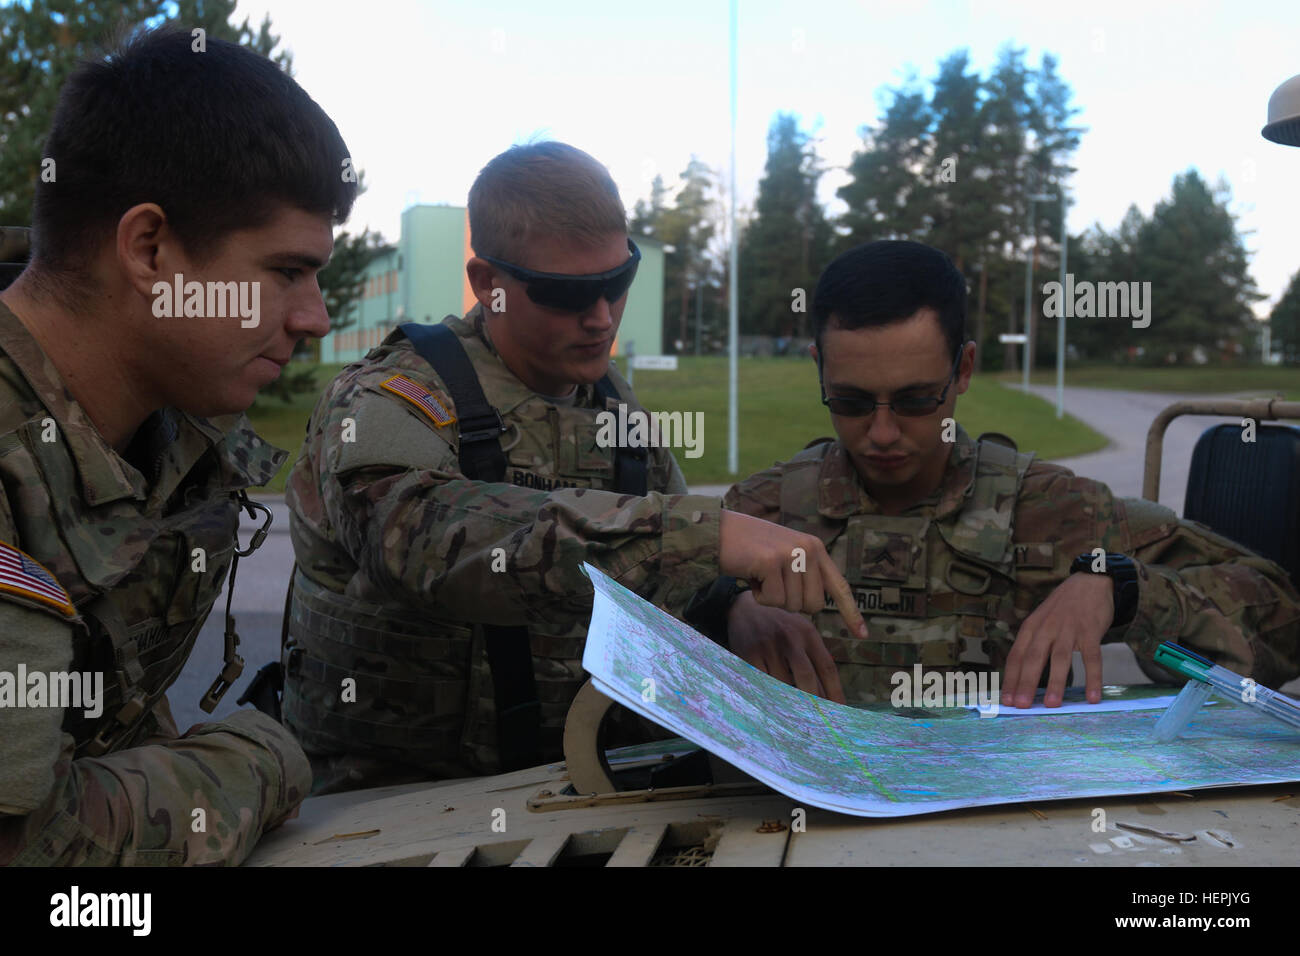 Spc. Skylar M. McMahon (left to rigth), Pvt. Michael V. Bonham, and Cpl. Evan A. Marroquin, Soldiers assigned to Destined Company, 2nd Battalion, 503rd Infantry Regiment, 173rd Airborne Brigade, plot coordinates on a map during a land navigation course exercise in Voru, Estonia, Sept. 9, as part of Swift Bayonet, a training exercise that is part of Operation Atlantic Resolve. The hands-on practical exercises ensured confidence for real-world scenarios factoring in weather and terrain. (U.S. Army photo by Spc. Jacqueline Dowland, 13th Public Affairs Detachment) Land navigation course in Estonia Stock Photo